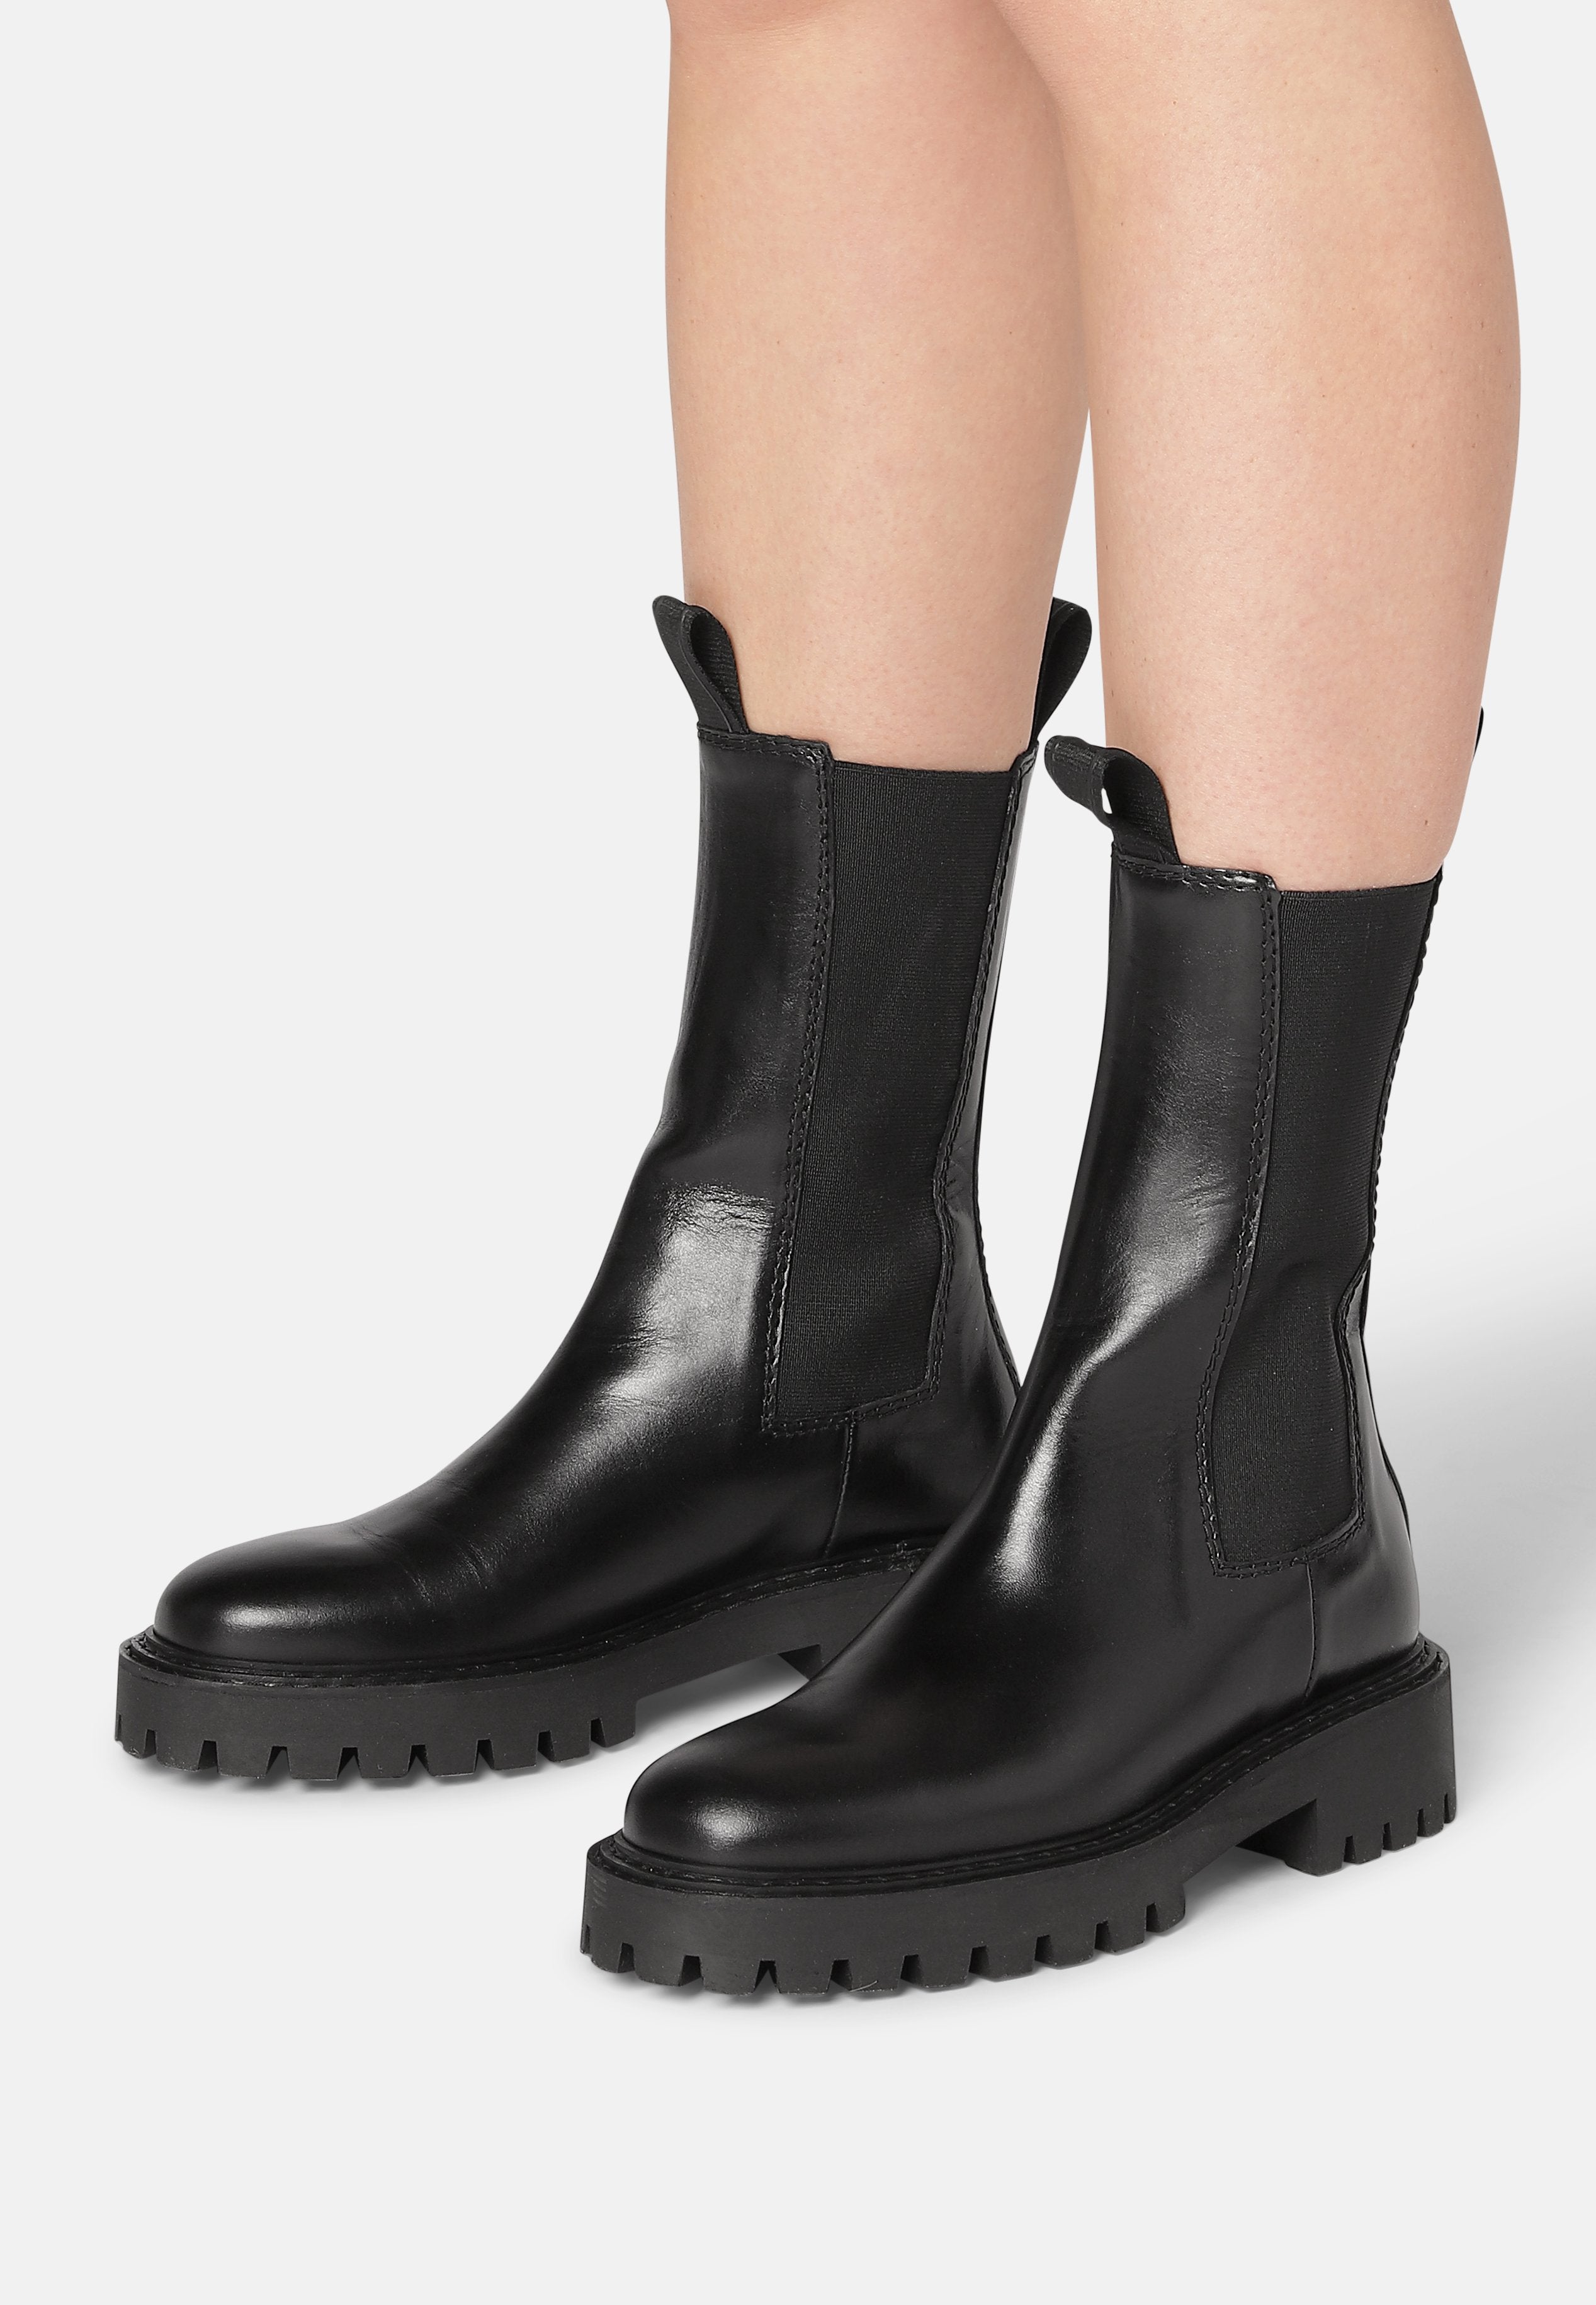 Angie Chelsea Black Boots LAST1127 -8